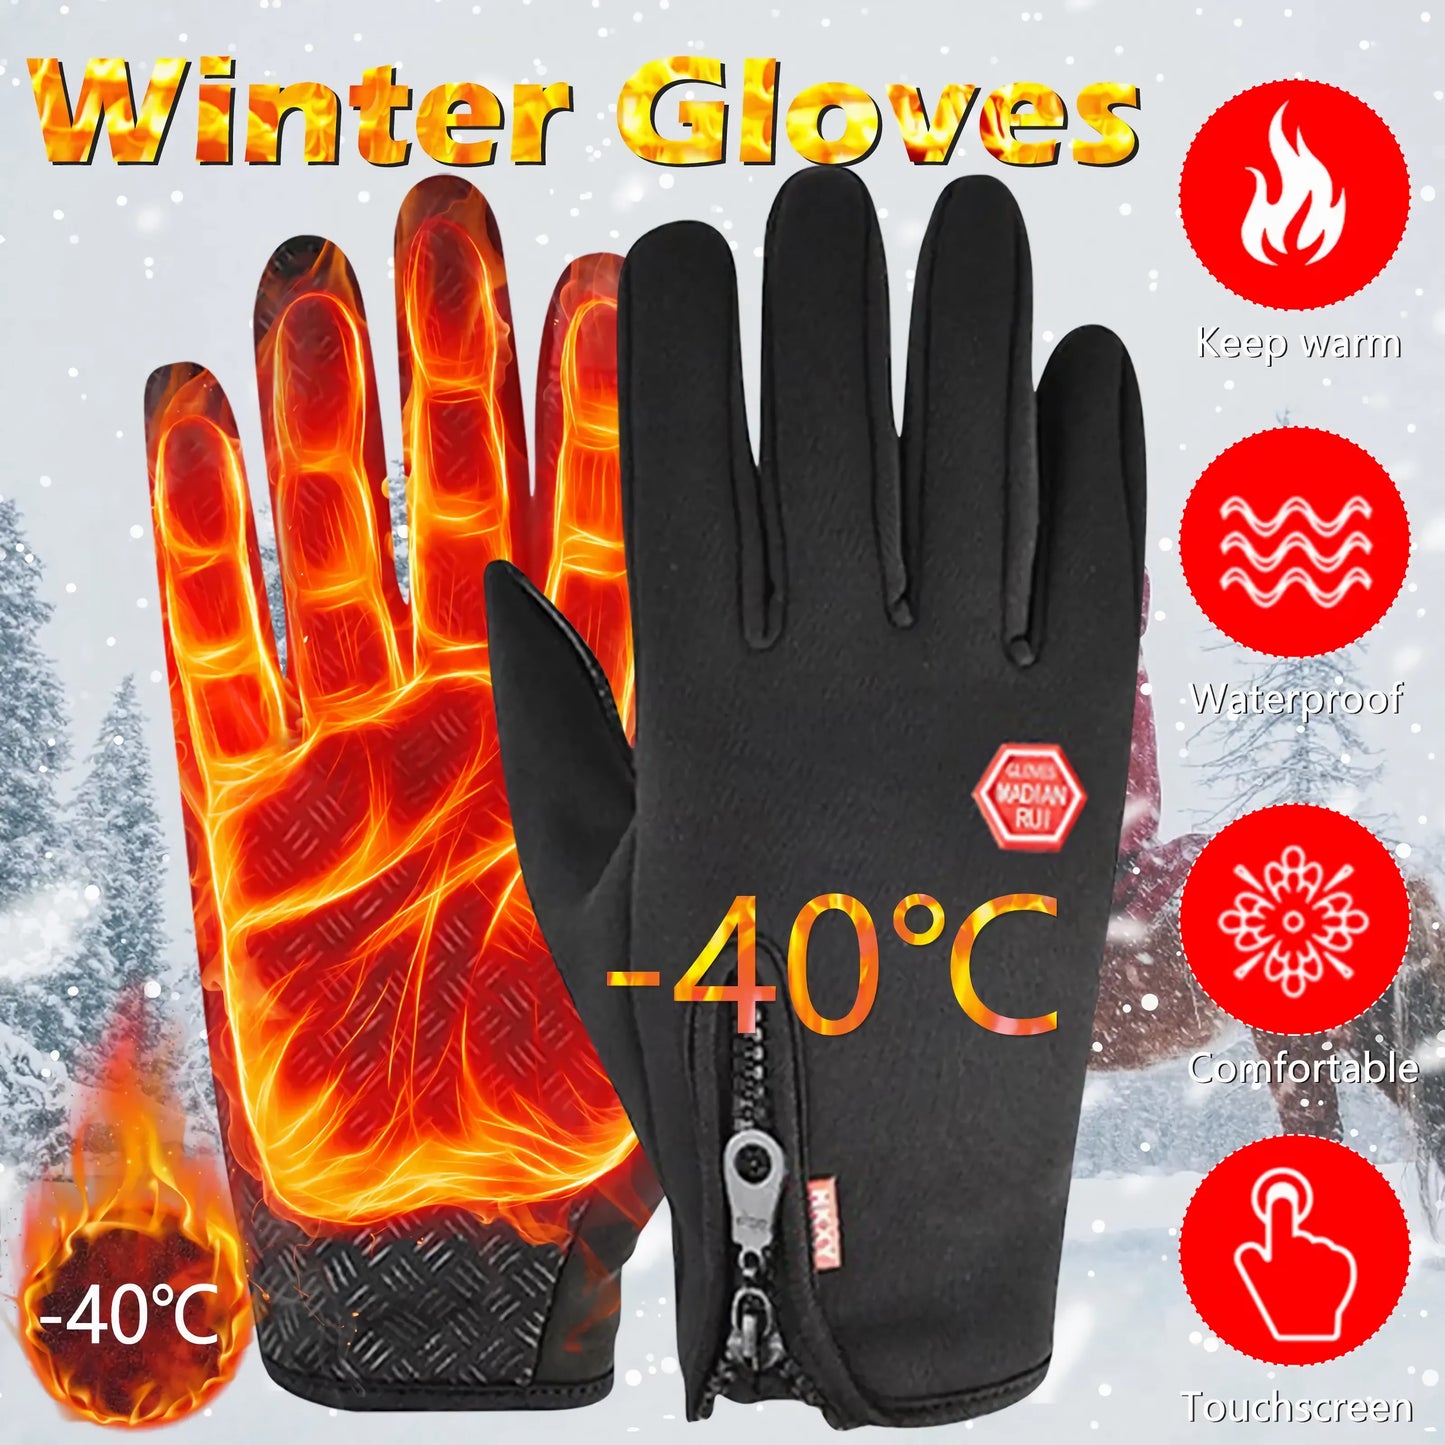 Warm Winter Tactical Gloves for Men & Women - Touchscreen Compatible, Waterproof, Non-Slip for Hiking, Skiing, Fishing, Heating , Cycling, and Snowboarding